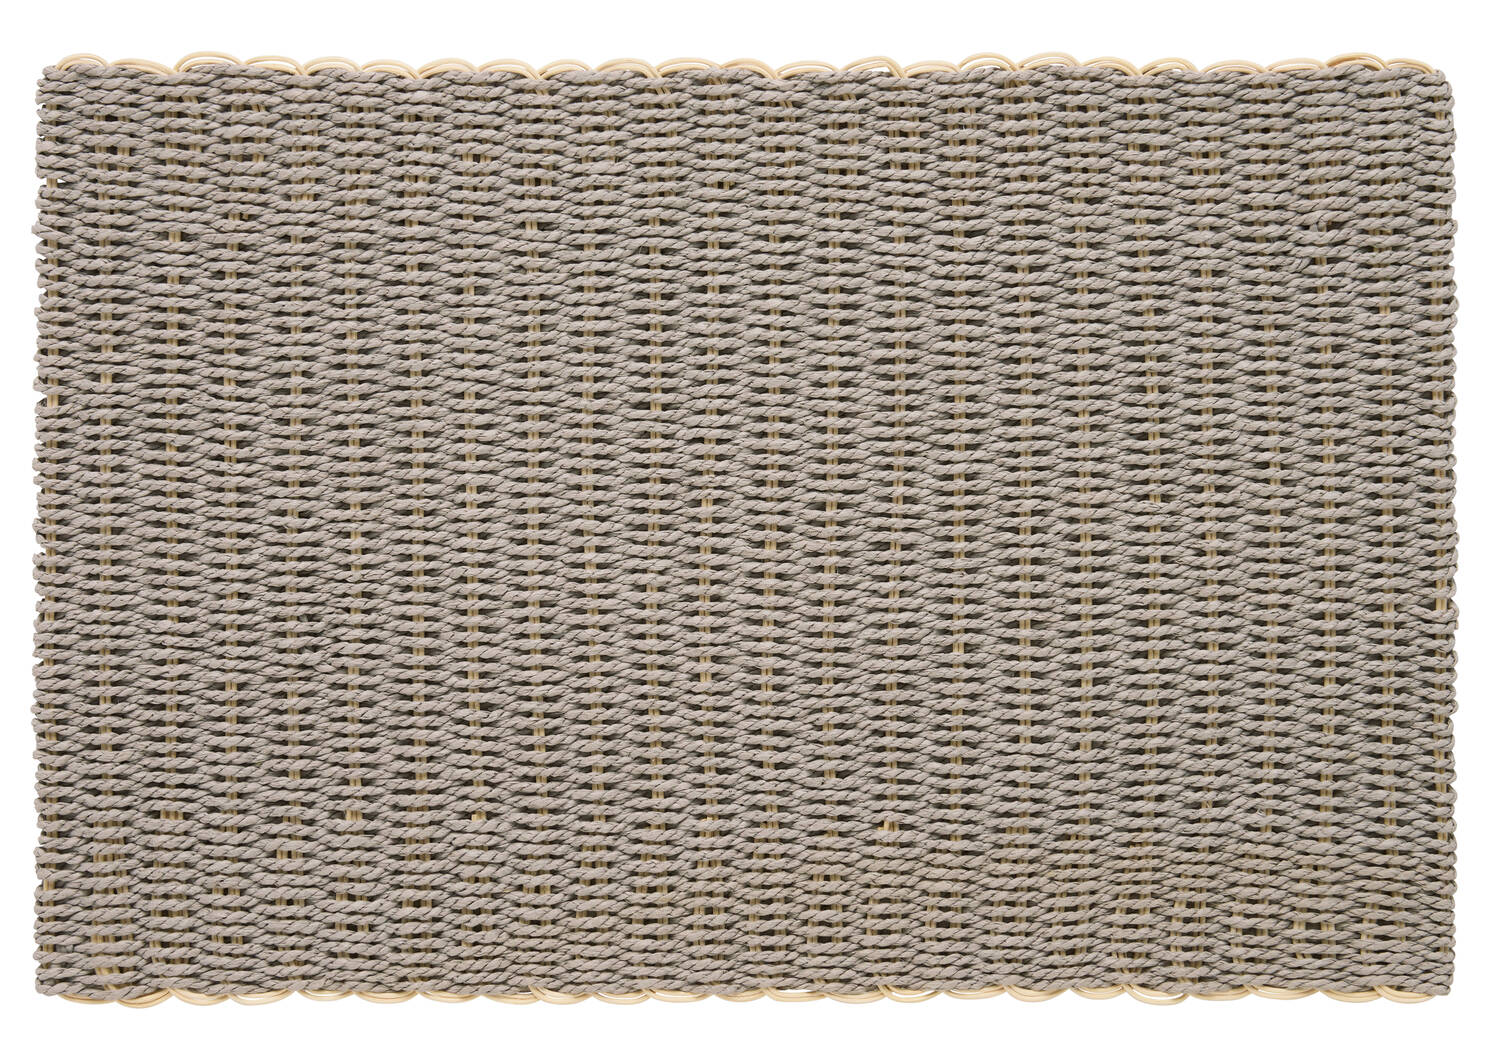 Cali Woven Placemat Grey